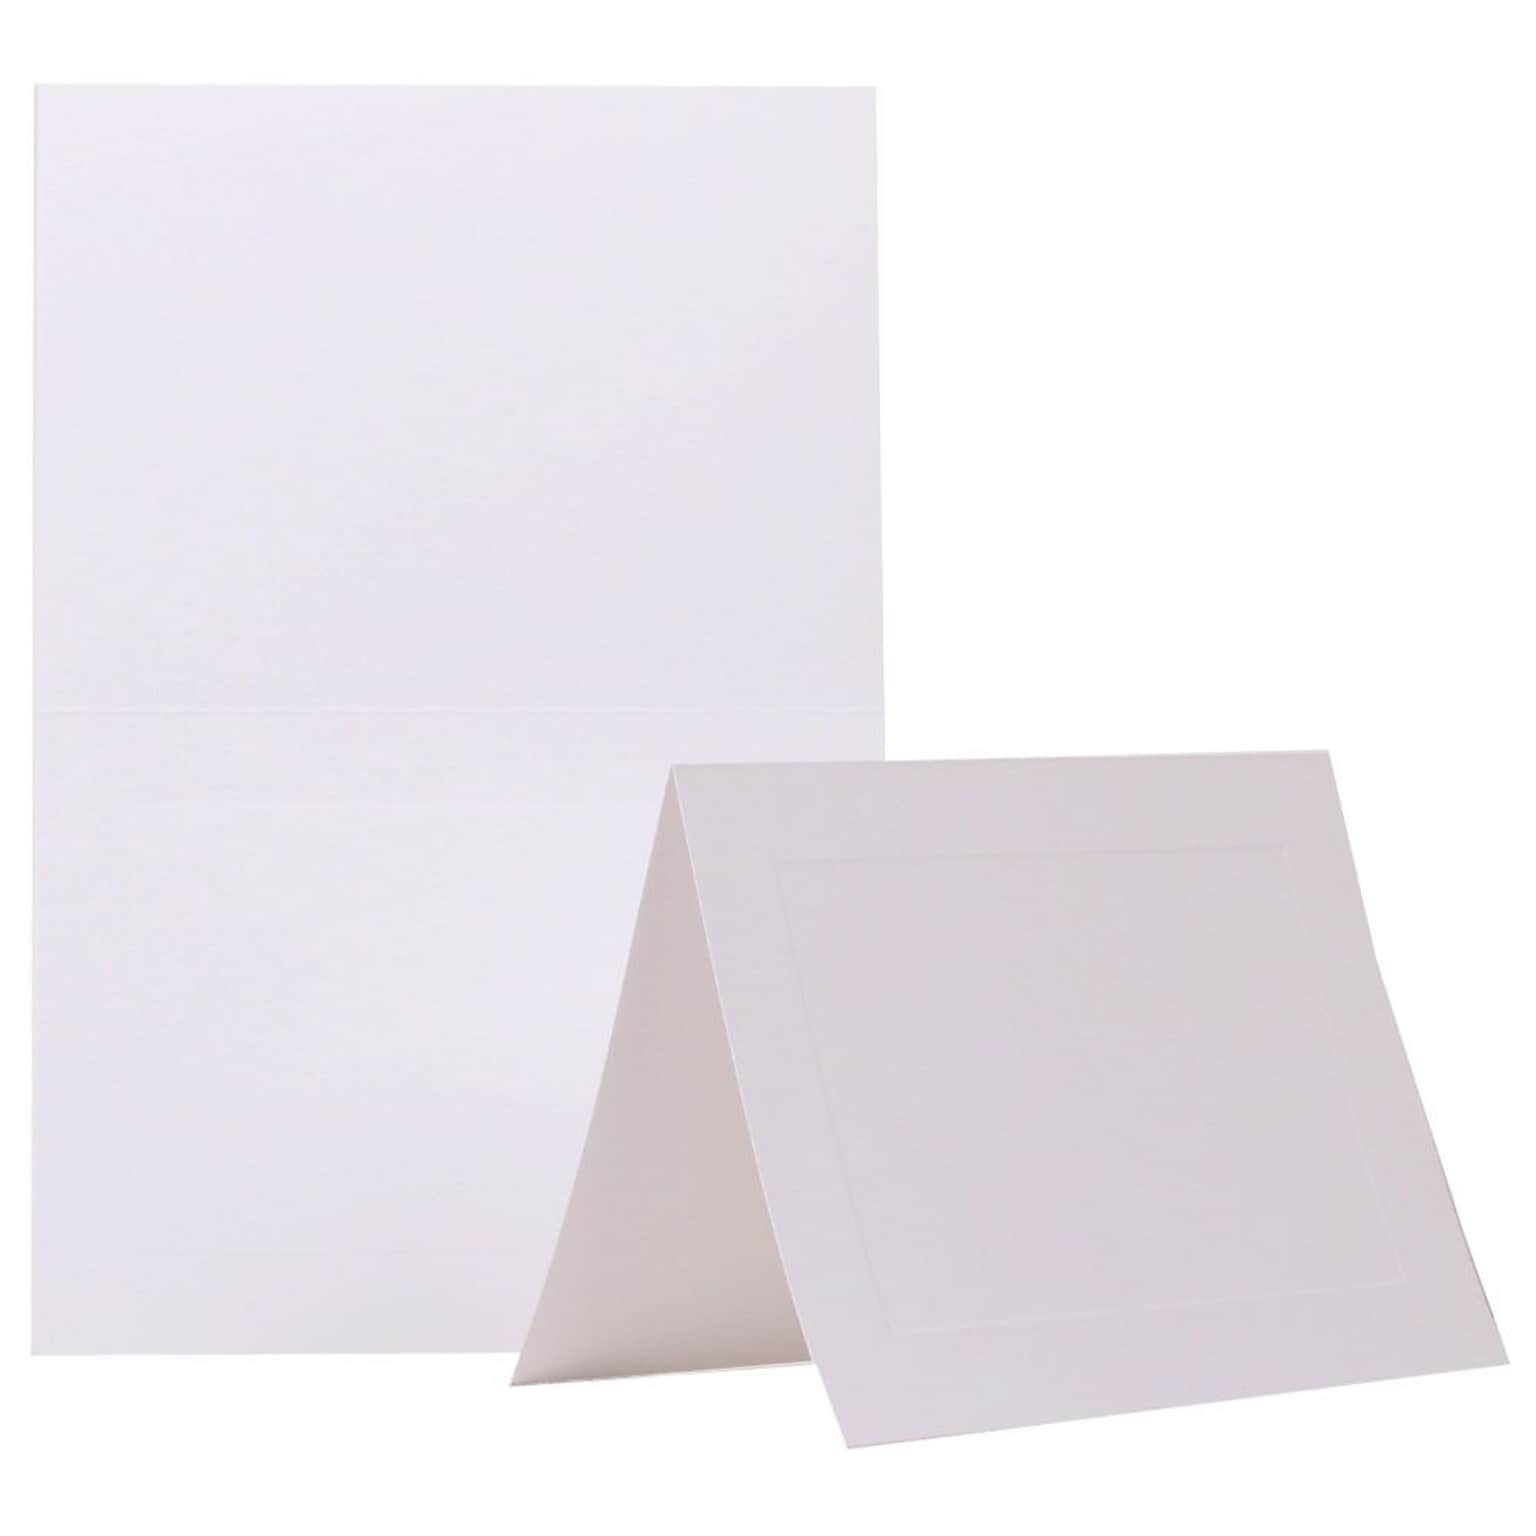 JAM Paper® Blank Foldover Cards, A7 size, 5 x 6 5/8, Ivory Panel, 25/pack (309943C)